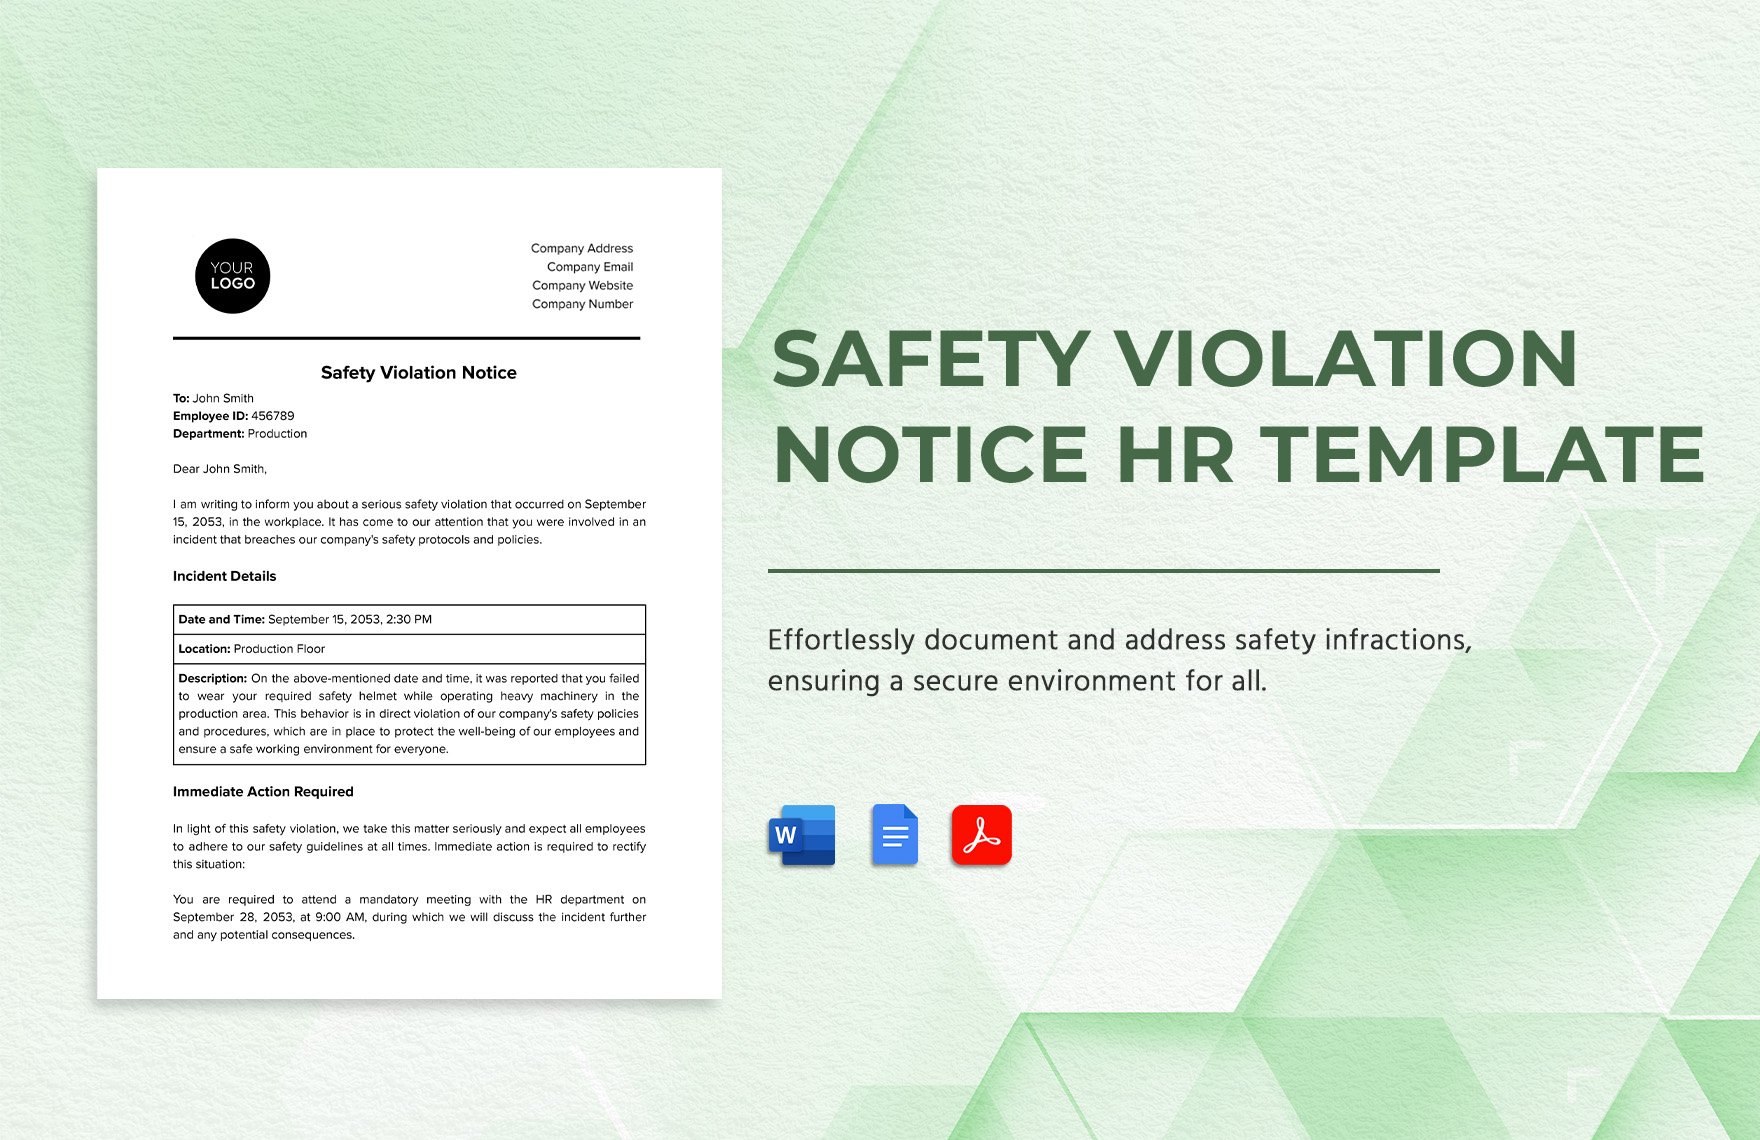 Safety Violation Notice HR Template in Word, Google Docs, PDF